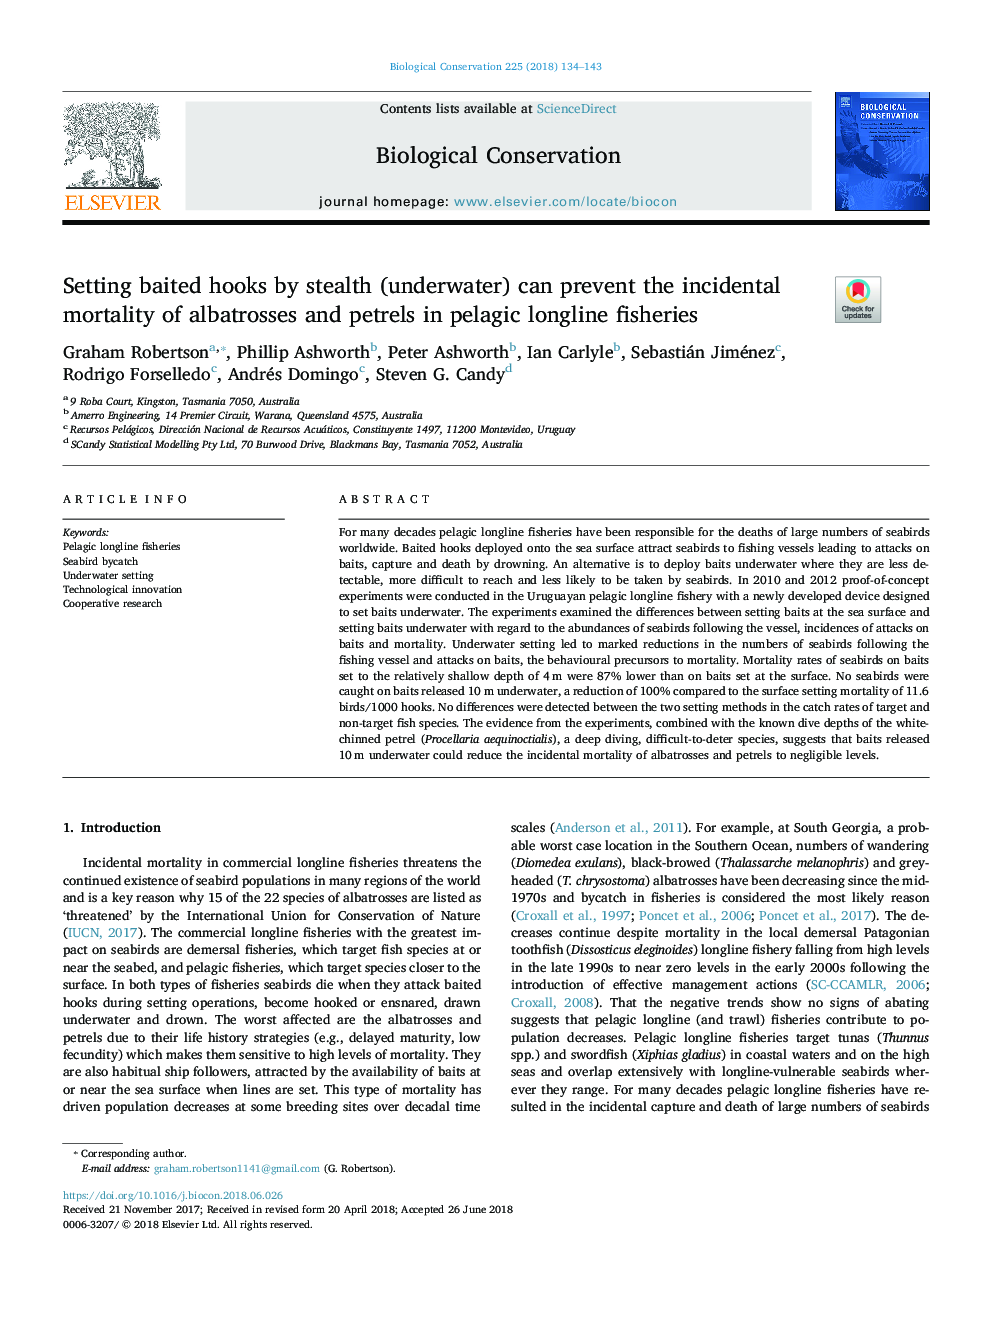 Setting baited hooks by stealth (underwater) can prevent the incidental mortality of albatrosses and petrels in pelagic longline fisheries